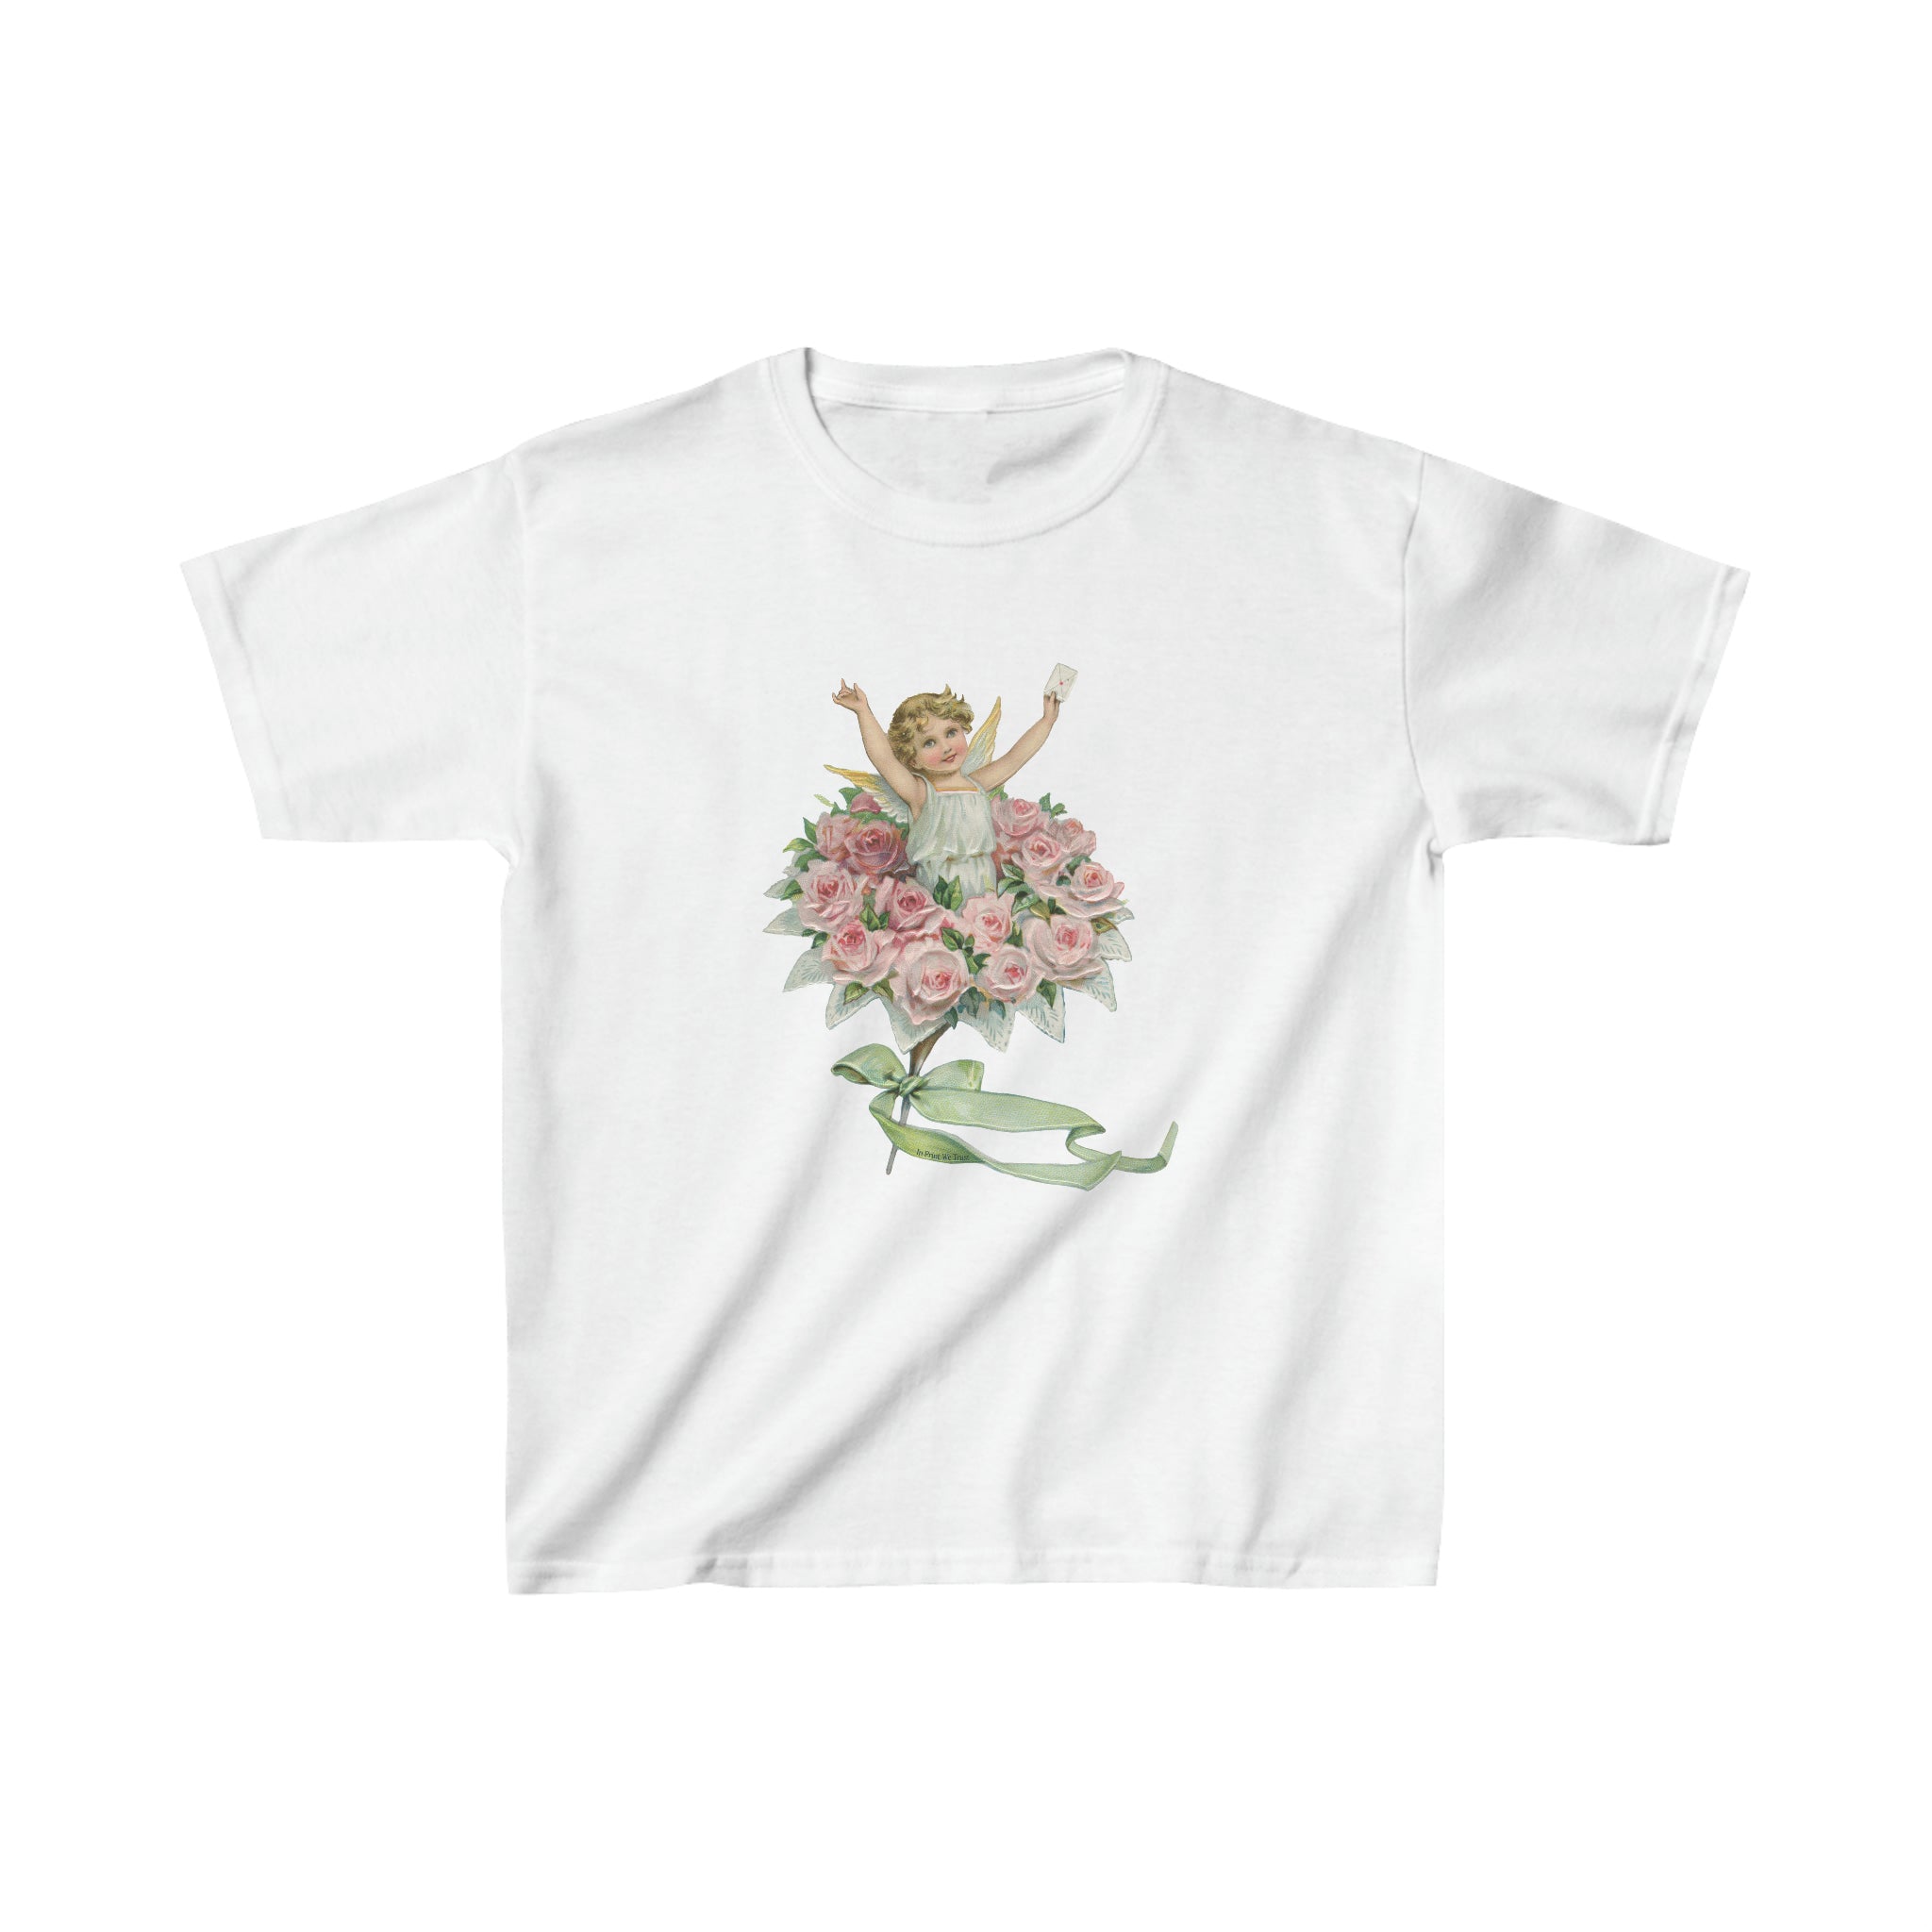 'Match Made in Heaven' baby tee - In Print We Trust